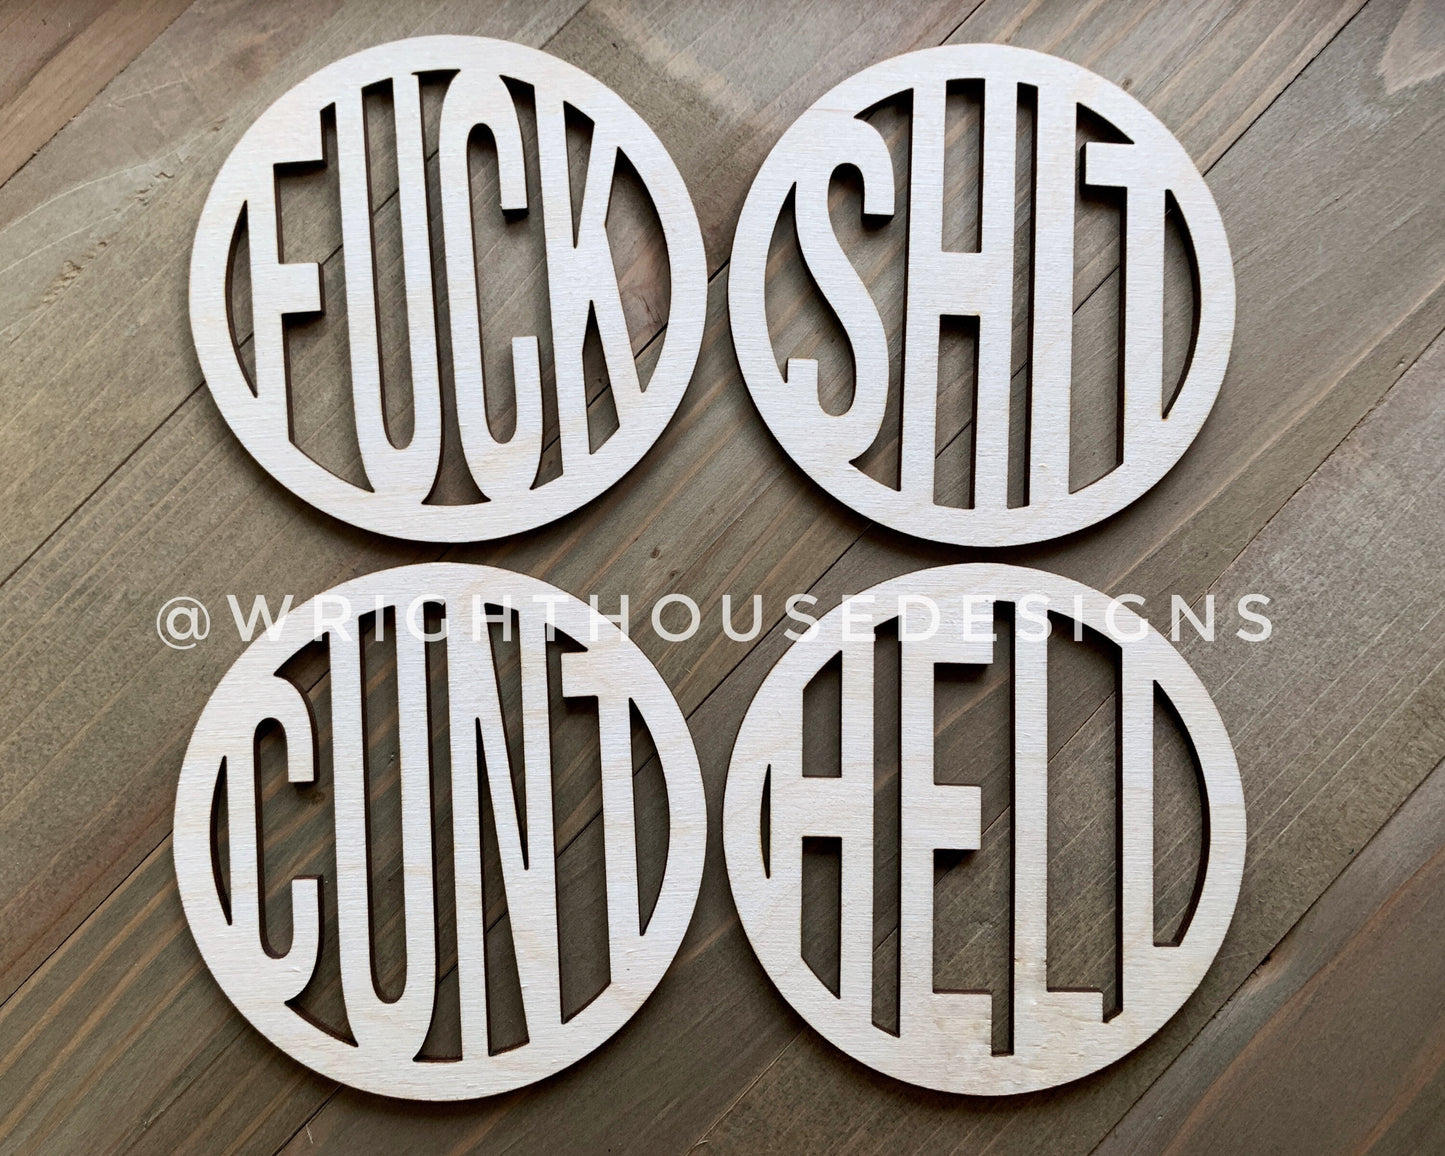 NSFW Wooden Coasters - Famous 4 Four Letter Curse Words - Coffee Table Accessories - Funny Gag Gifts